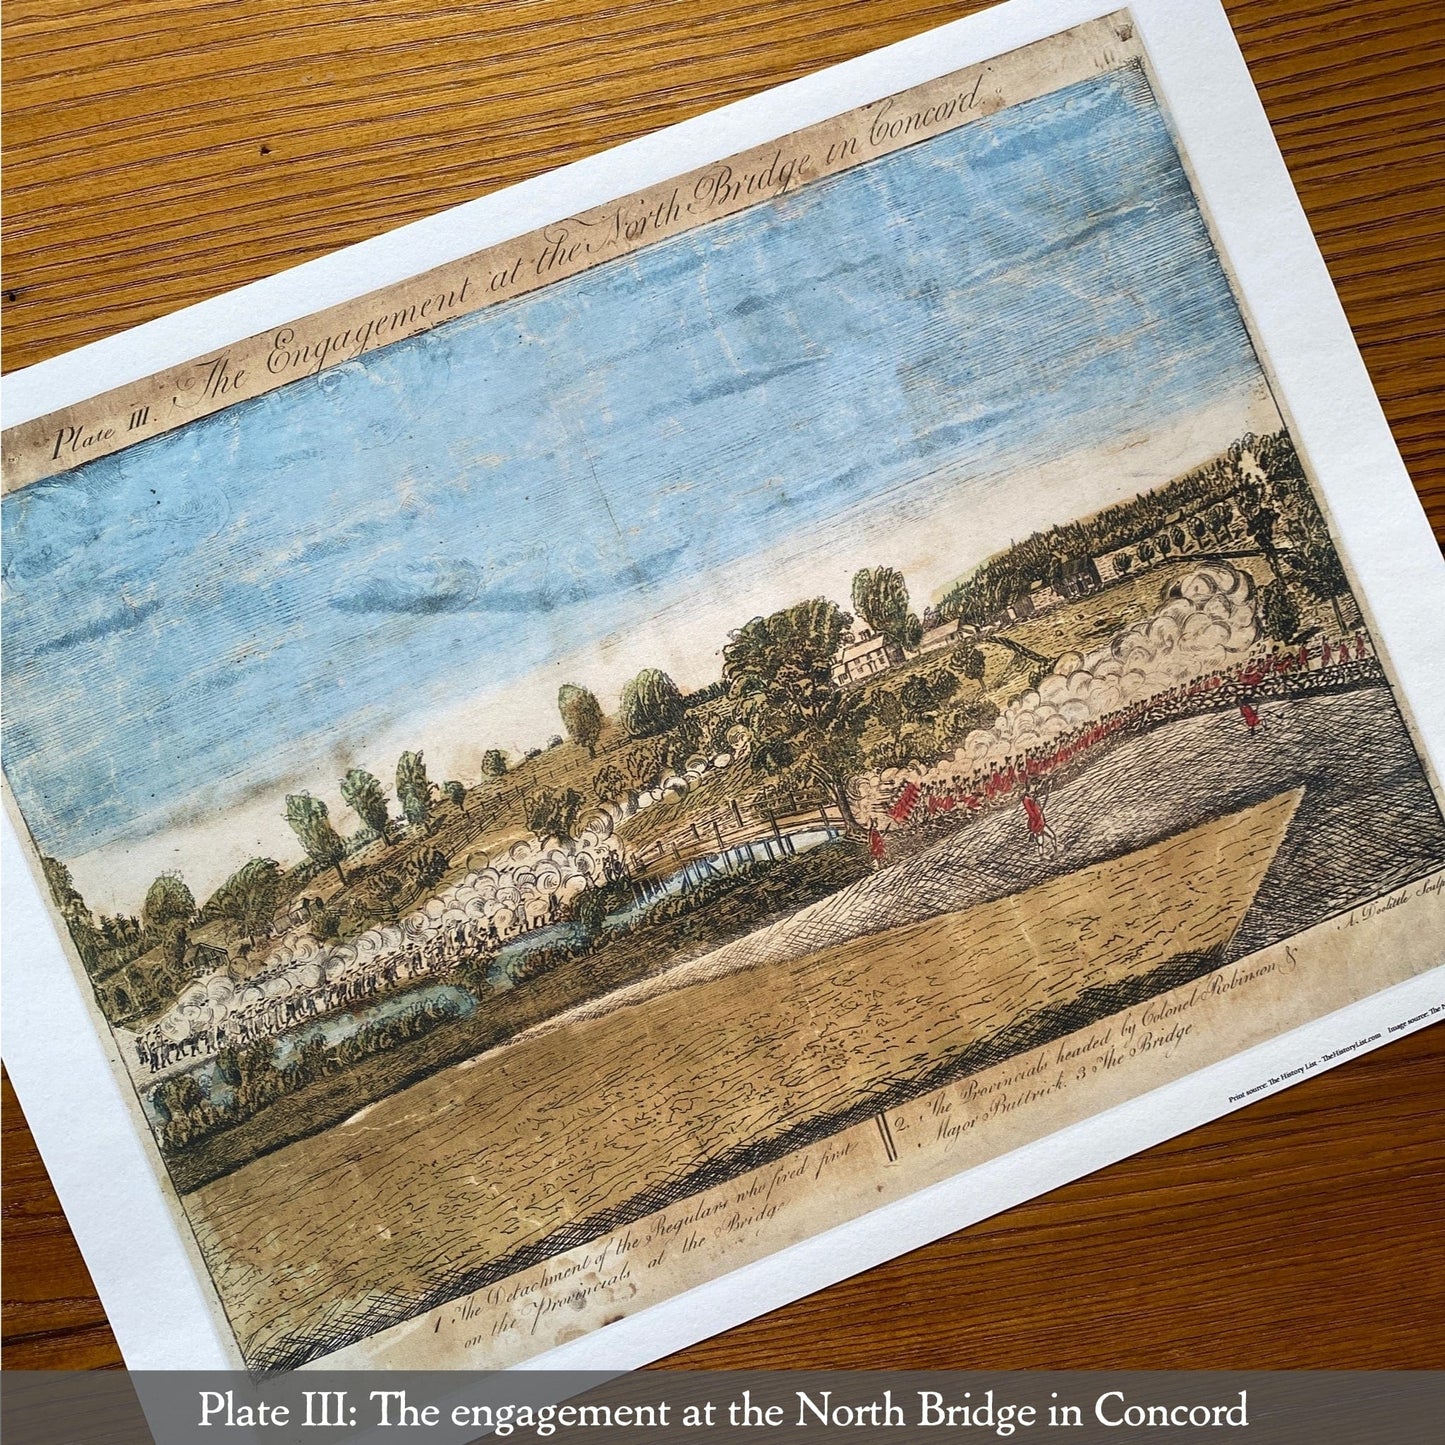 "The Doolittle Engravings of the Battle of Lexington and Concord" Archival Prints